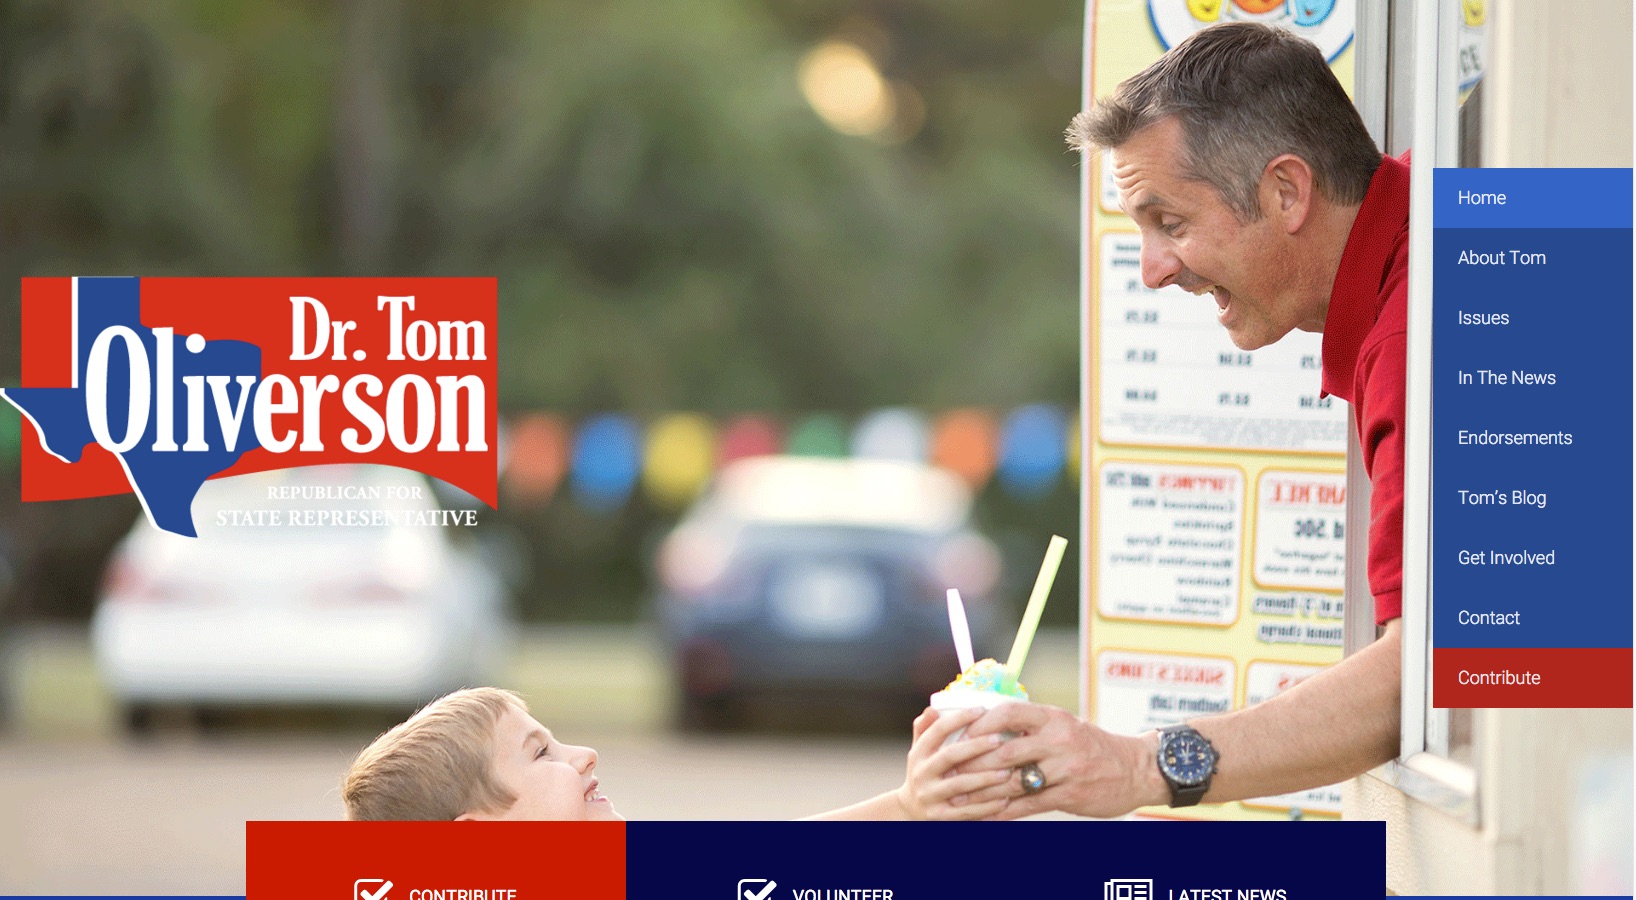 Kids love Tom Oliverson, too! Or maybe it's just the ice cream.